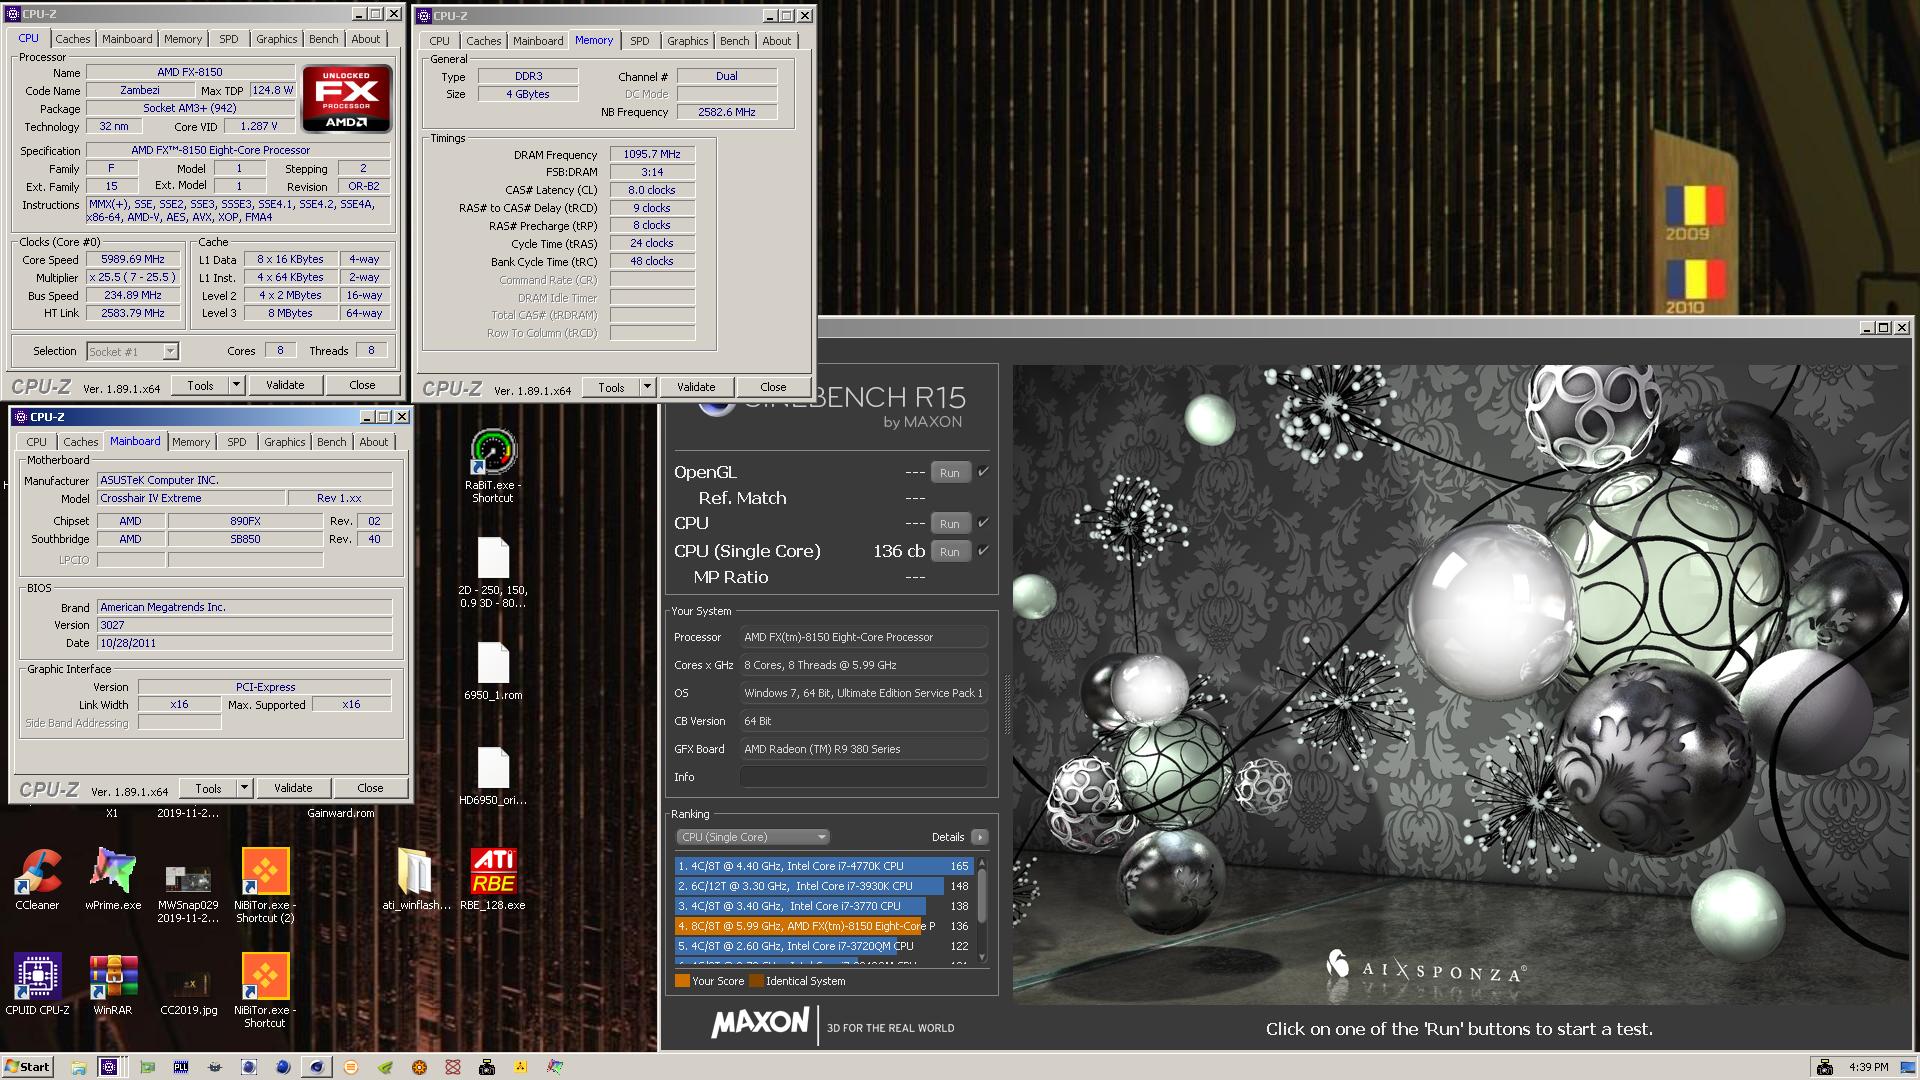 GRIFF`s Cinebench - R15 score: 136 cb with a FX-8150